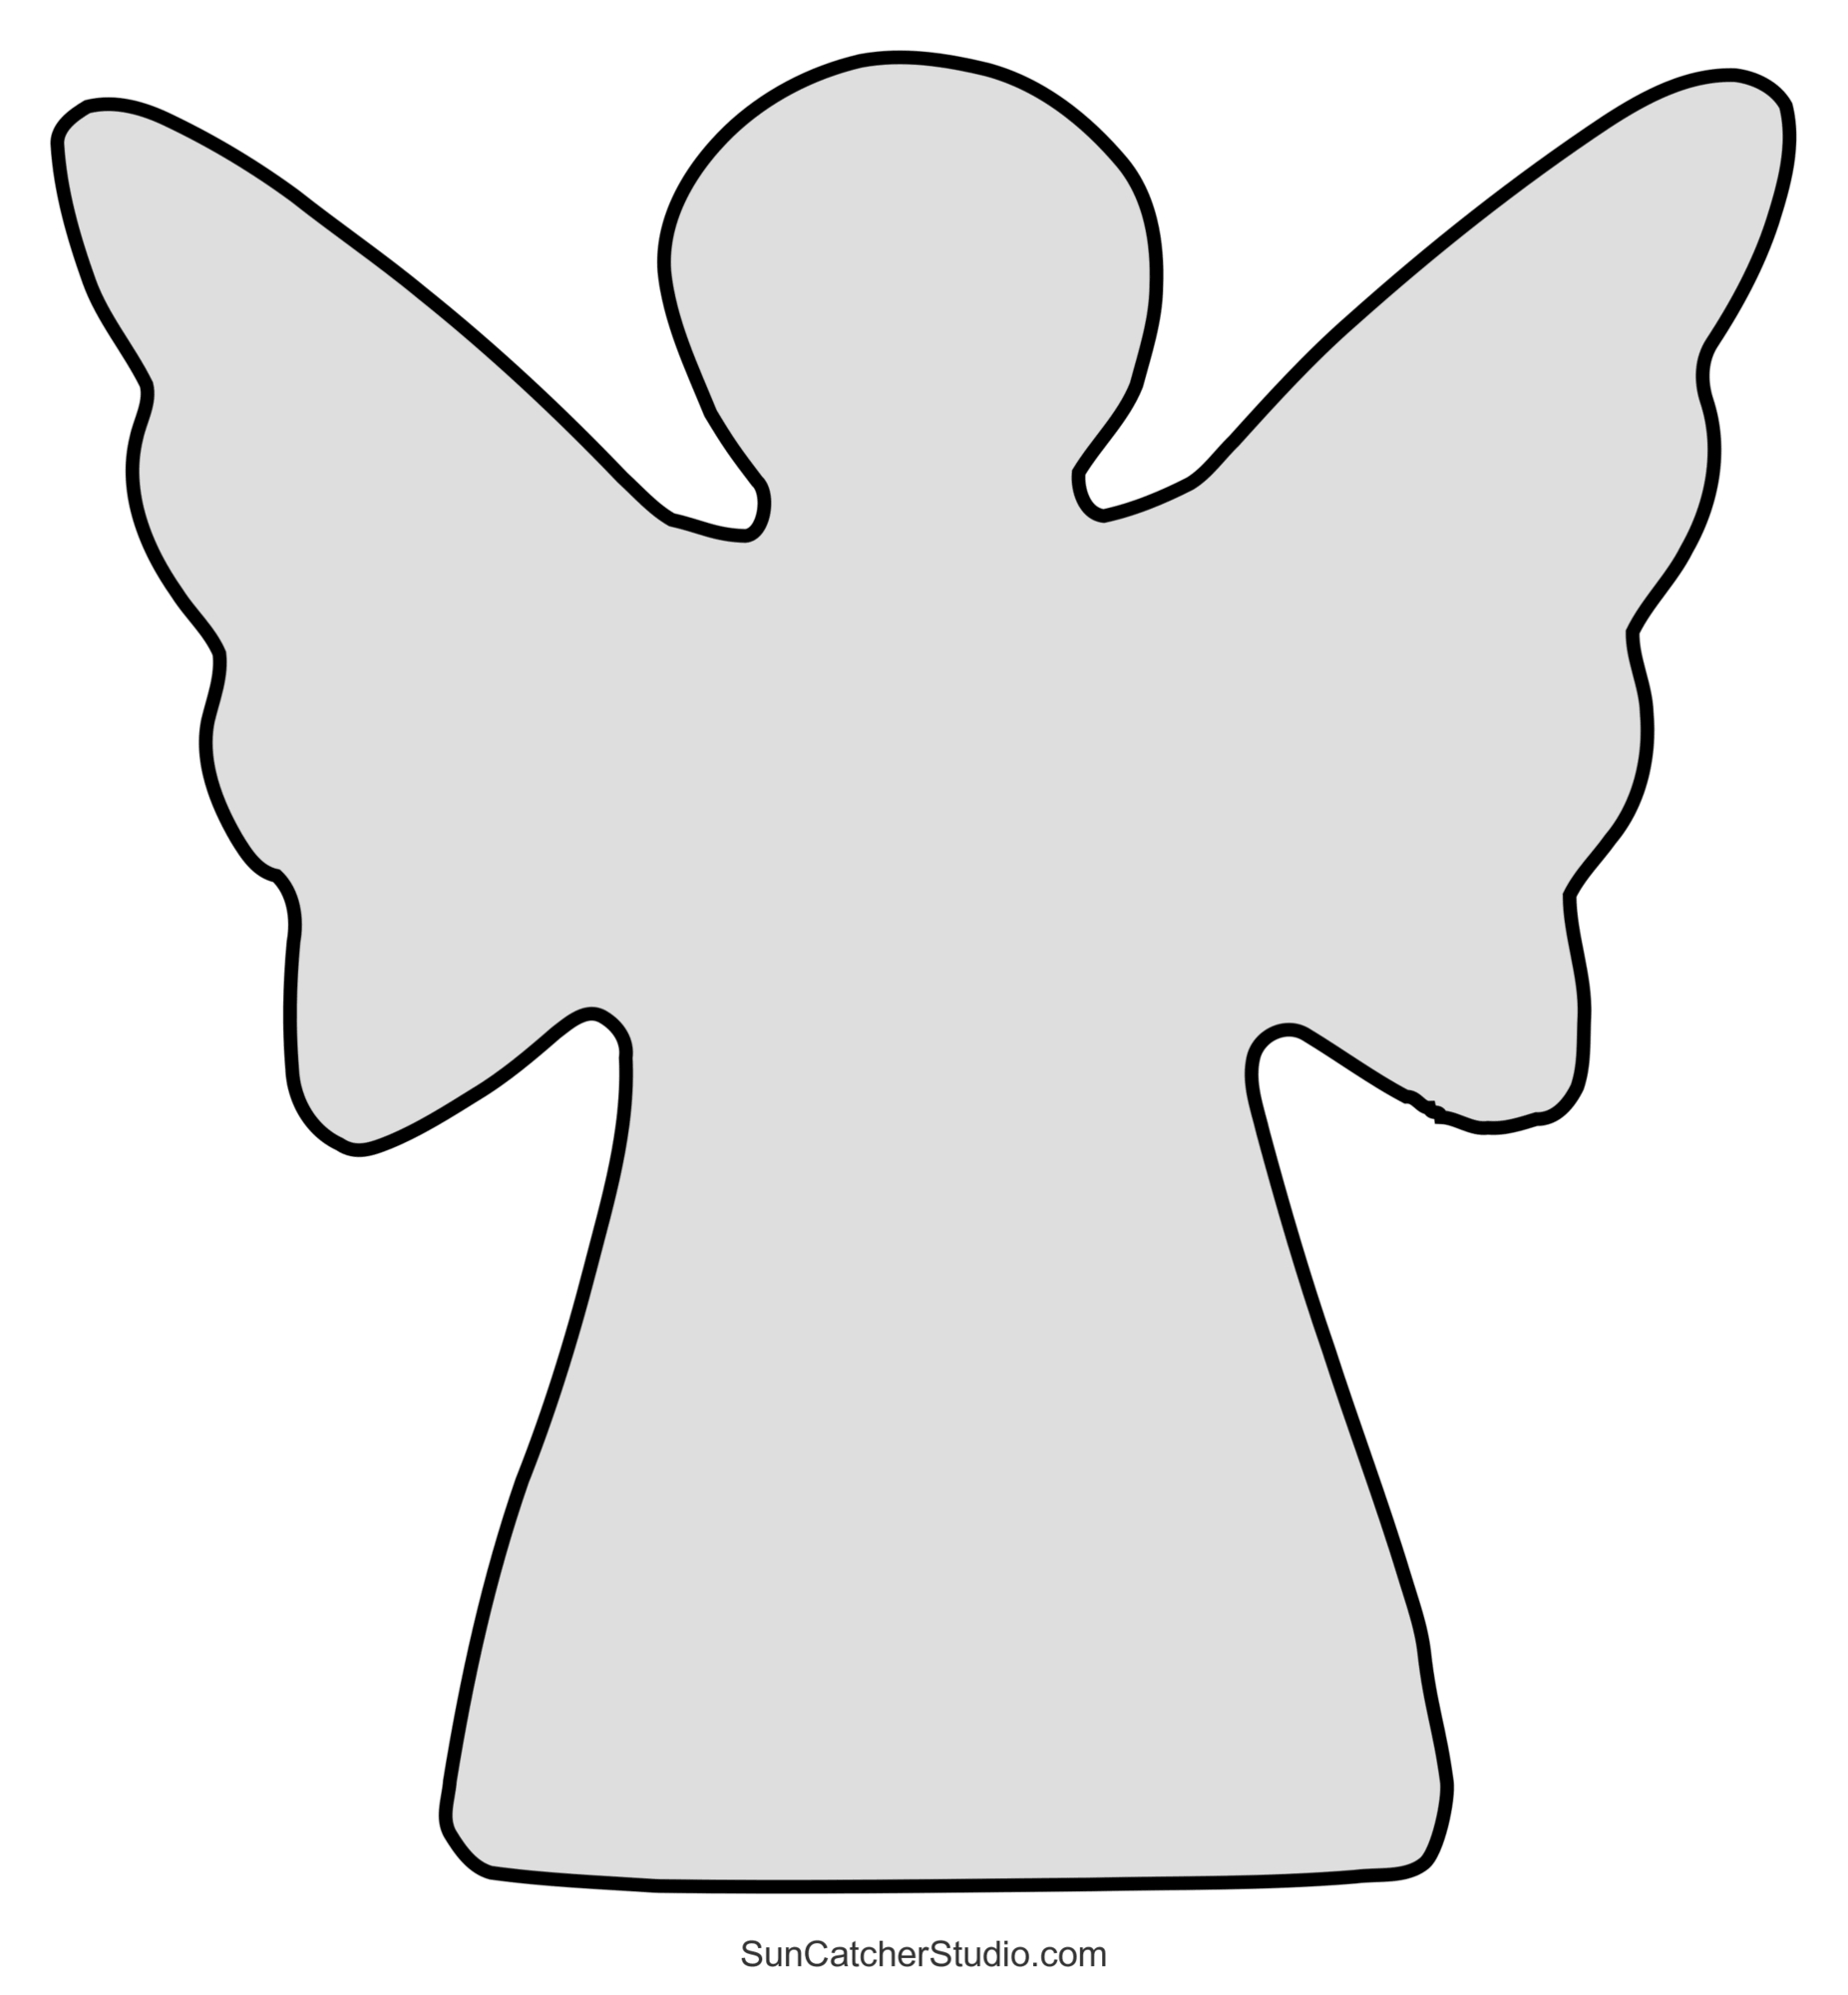 Angel Templates And Stencils (Free Printable Patterns) – Diy - Free Printable Angel Templates